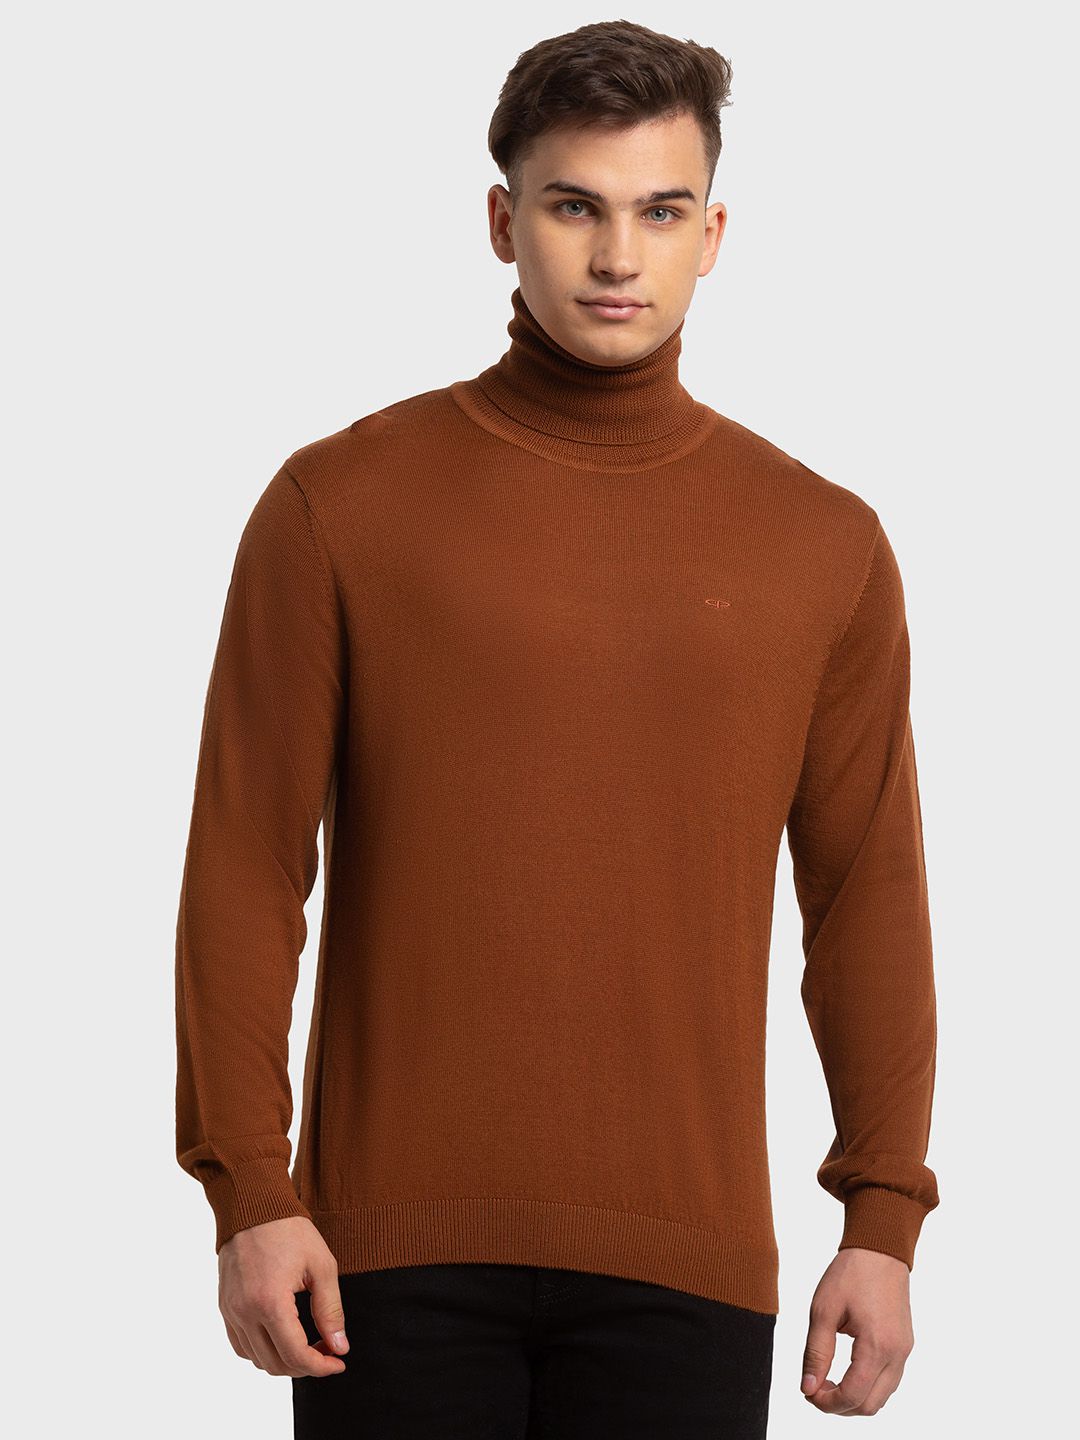     			Colorplus Acrylic High Neck Men's Full Sleeves Pullover Sweater - Brown ( Pack of 1 )